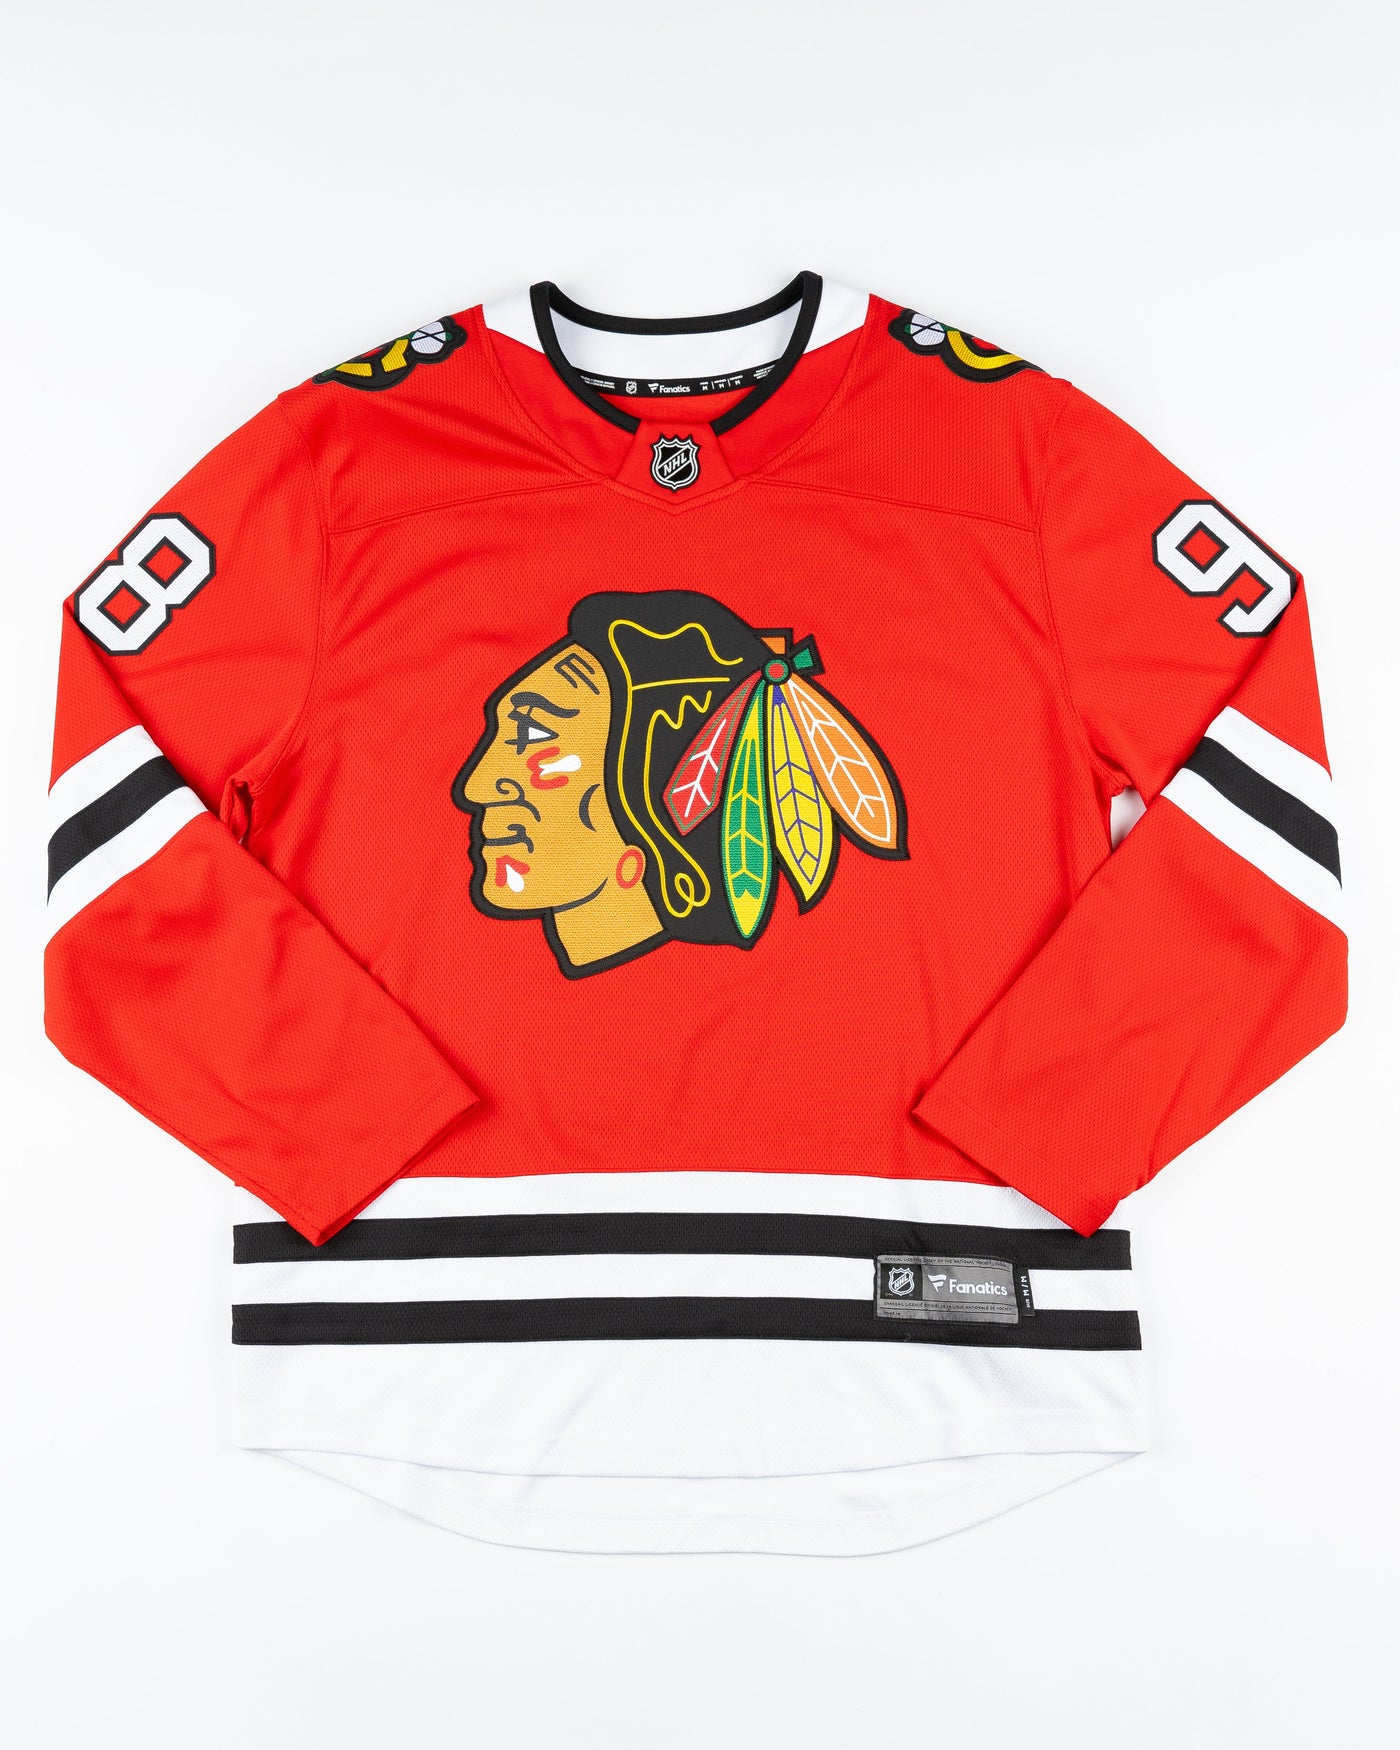 red Fanatics replica Chicago Blackhawks jersey with Connor Bedard name and number - front lay flat